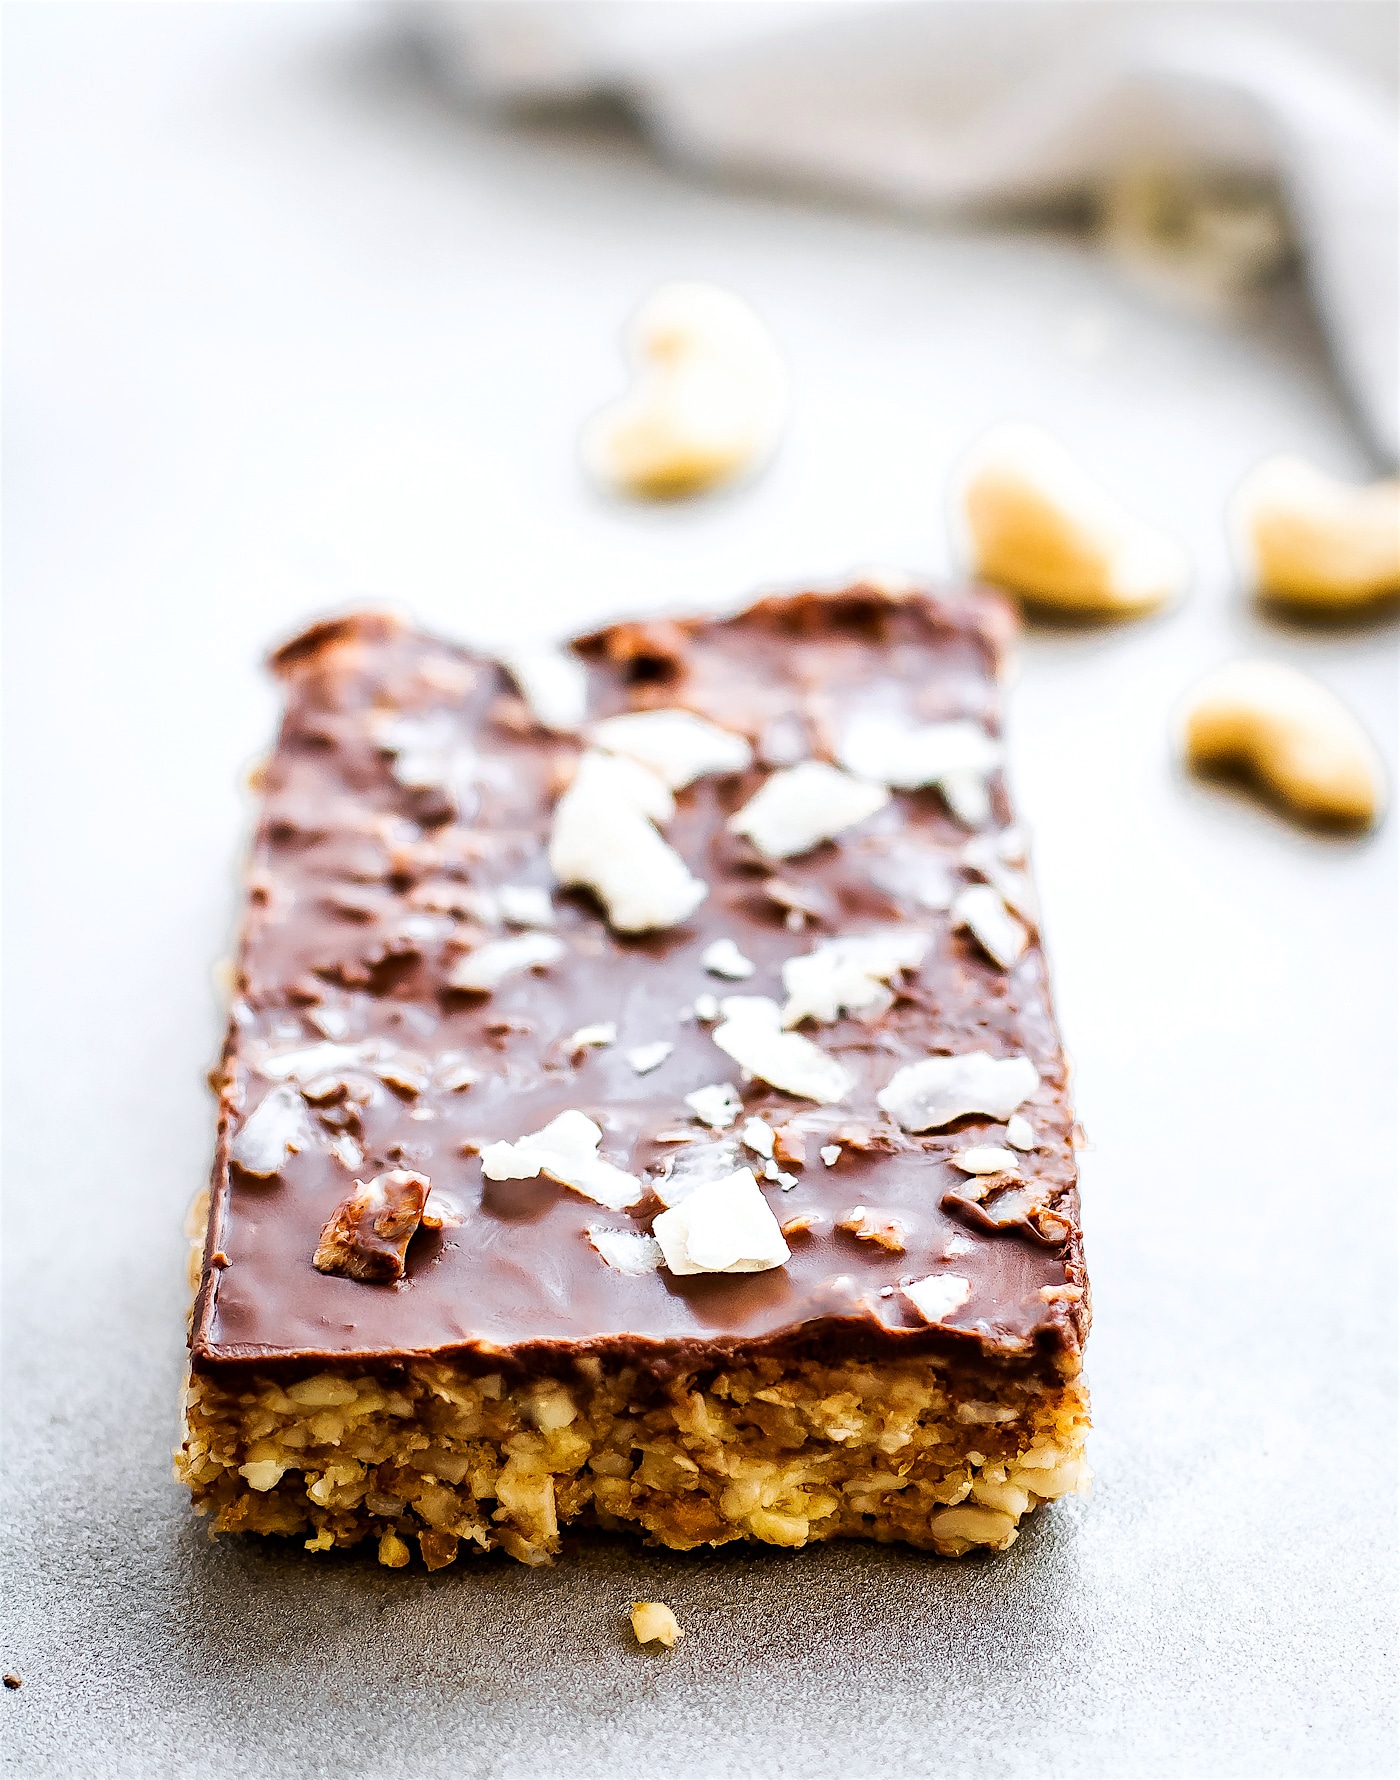 No bake Chocolate Coconut Cashew Bars made in 3 easy steps! Tasty no bake chocolate bars that are vegan & paleo. No oil needed. A healthy snack or dessert.